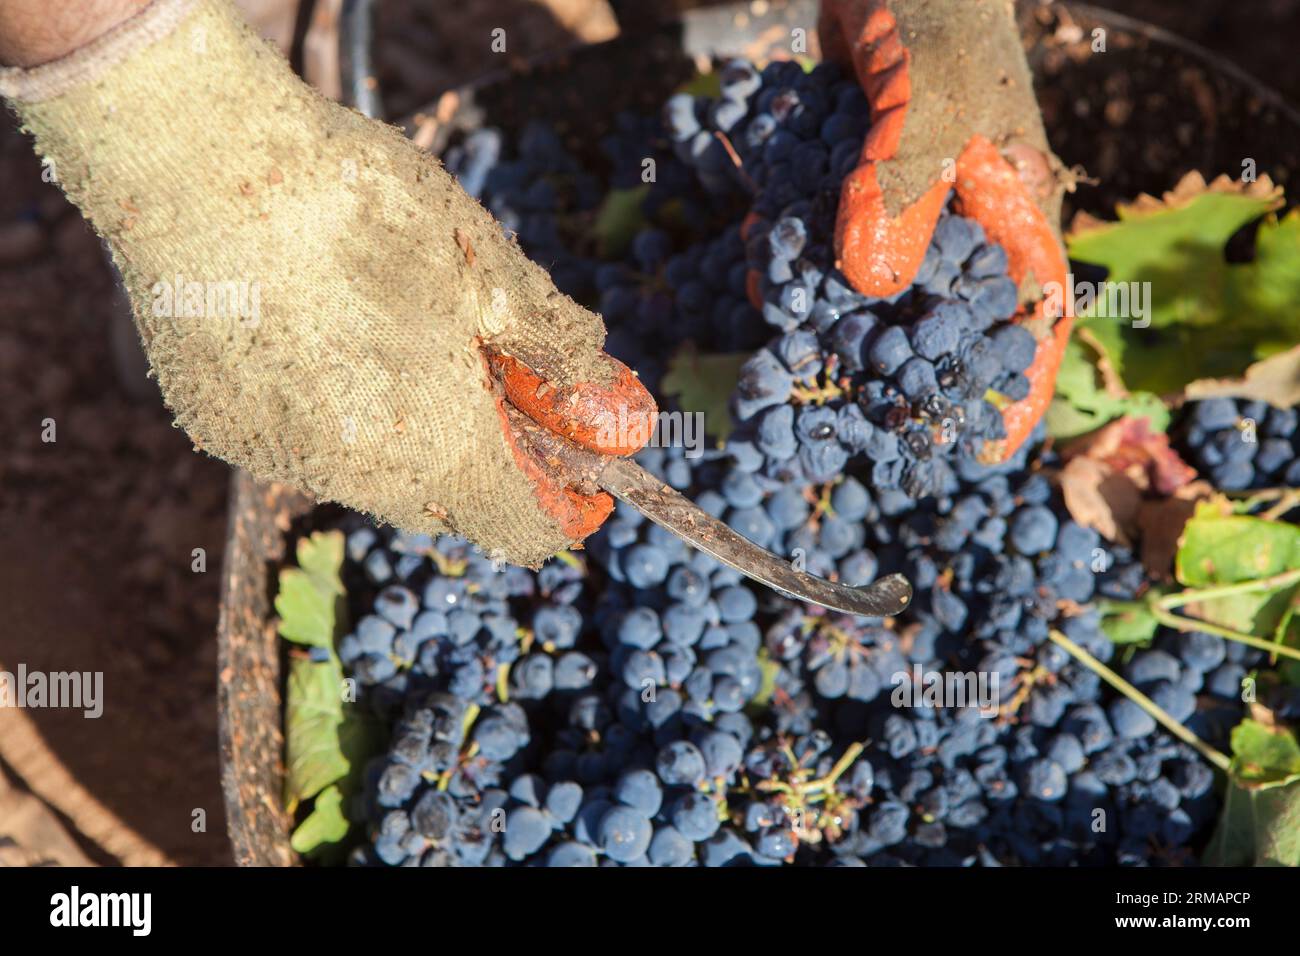 Grape picker working with curved knife and gloves. Grape harvest season scene Stock Photo